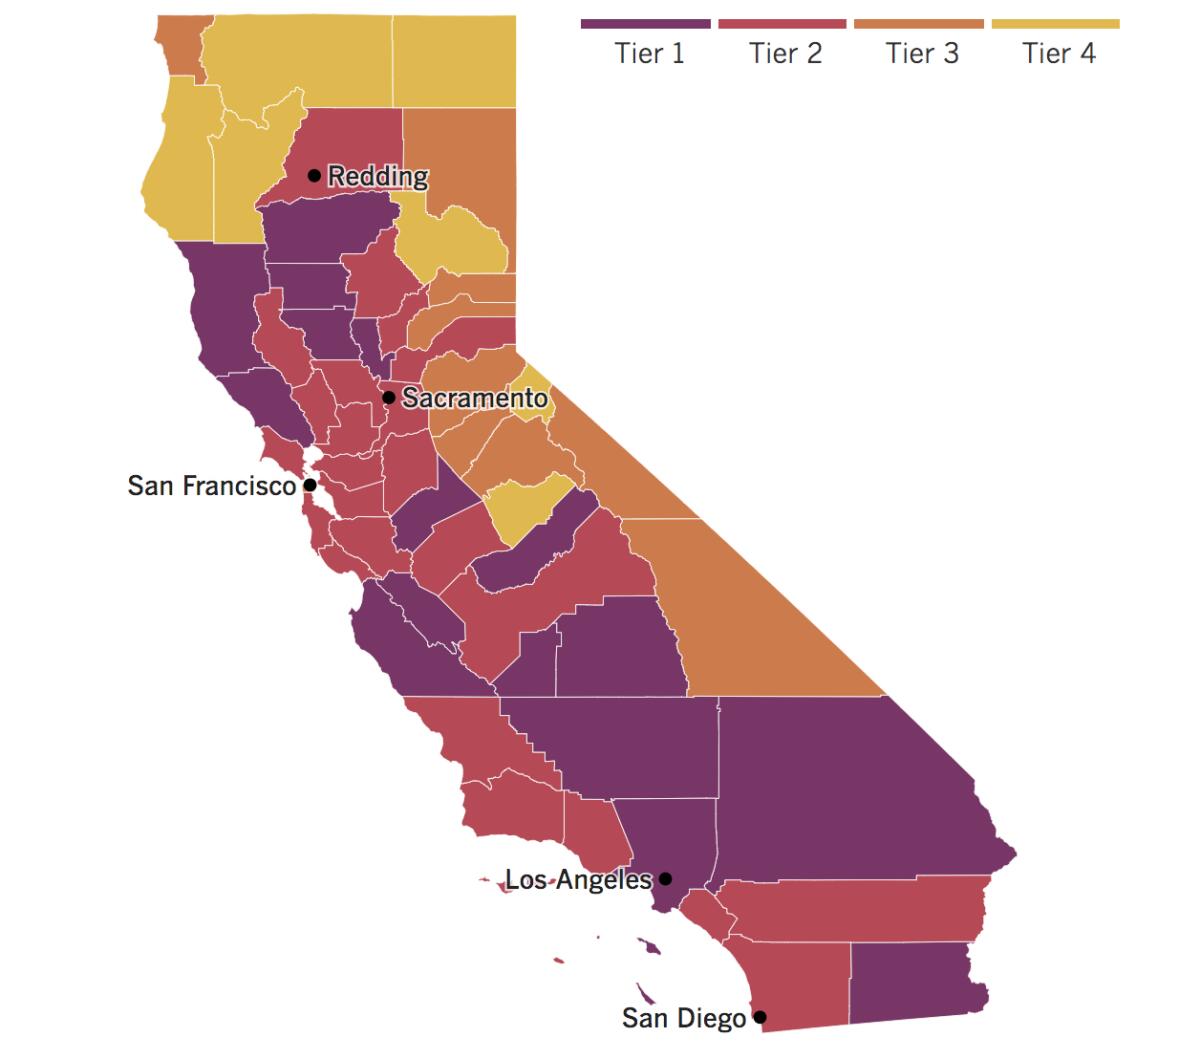 A map of California showing what tiers counties have been assigned based on their local levels of coronavirus risk.